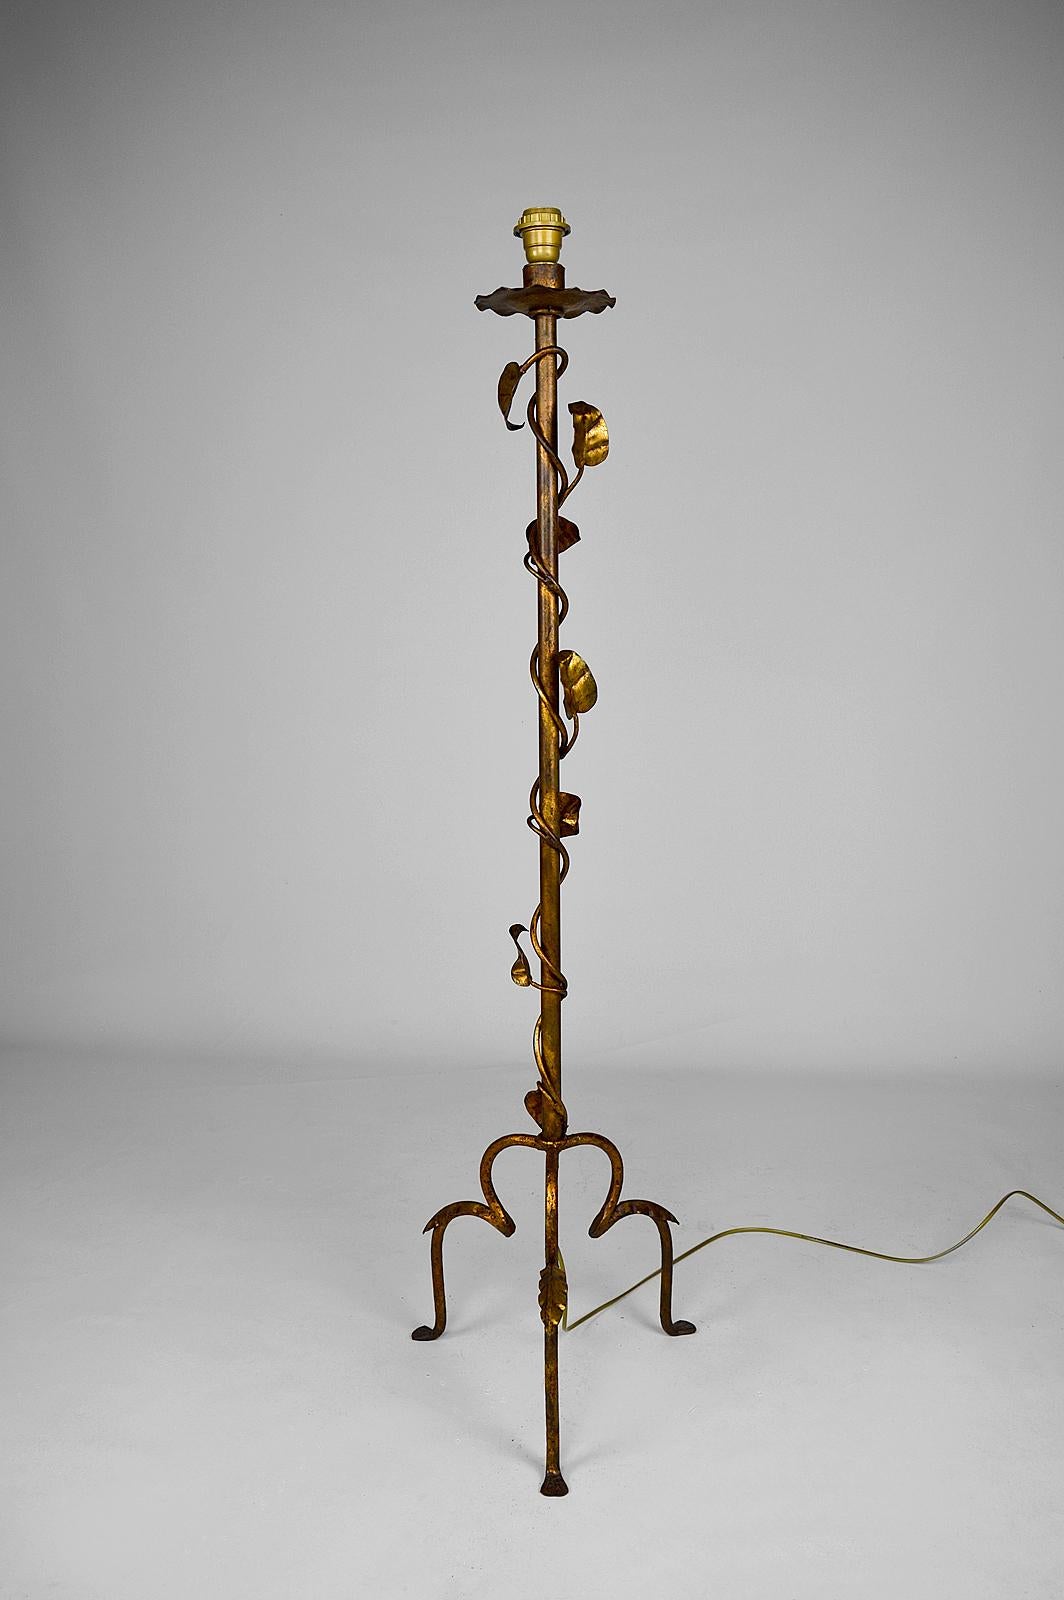 Elegant floor lamp in gilded wrought iron.
Tripod, depicting climbing plants.

Art Deco, France, around 1940-1950.

In good condition, electricity redone.

Dimensions :
Height 130cm
Diameter 40cm

Don't hesitate to contact us for a delivery quote.